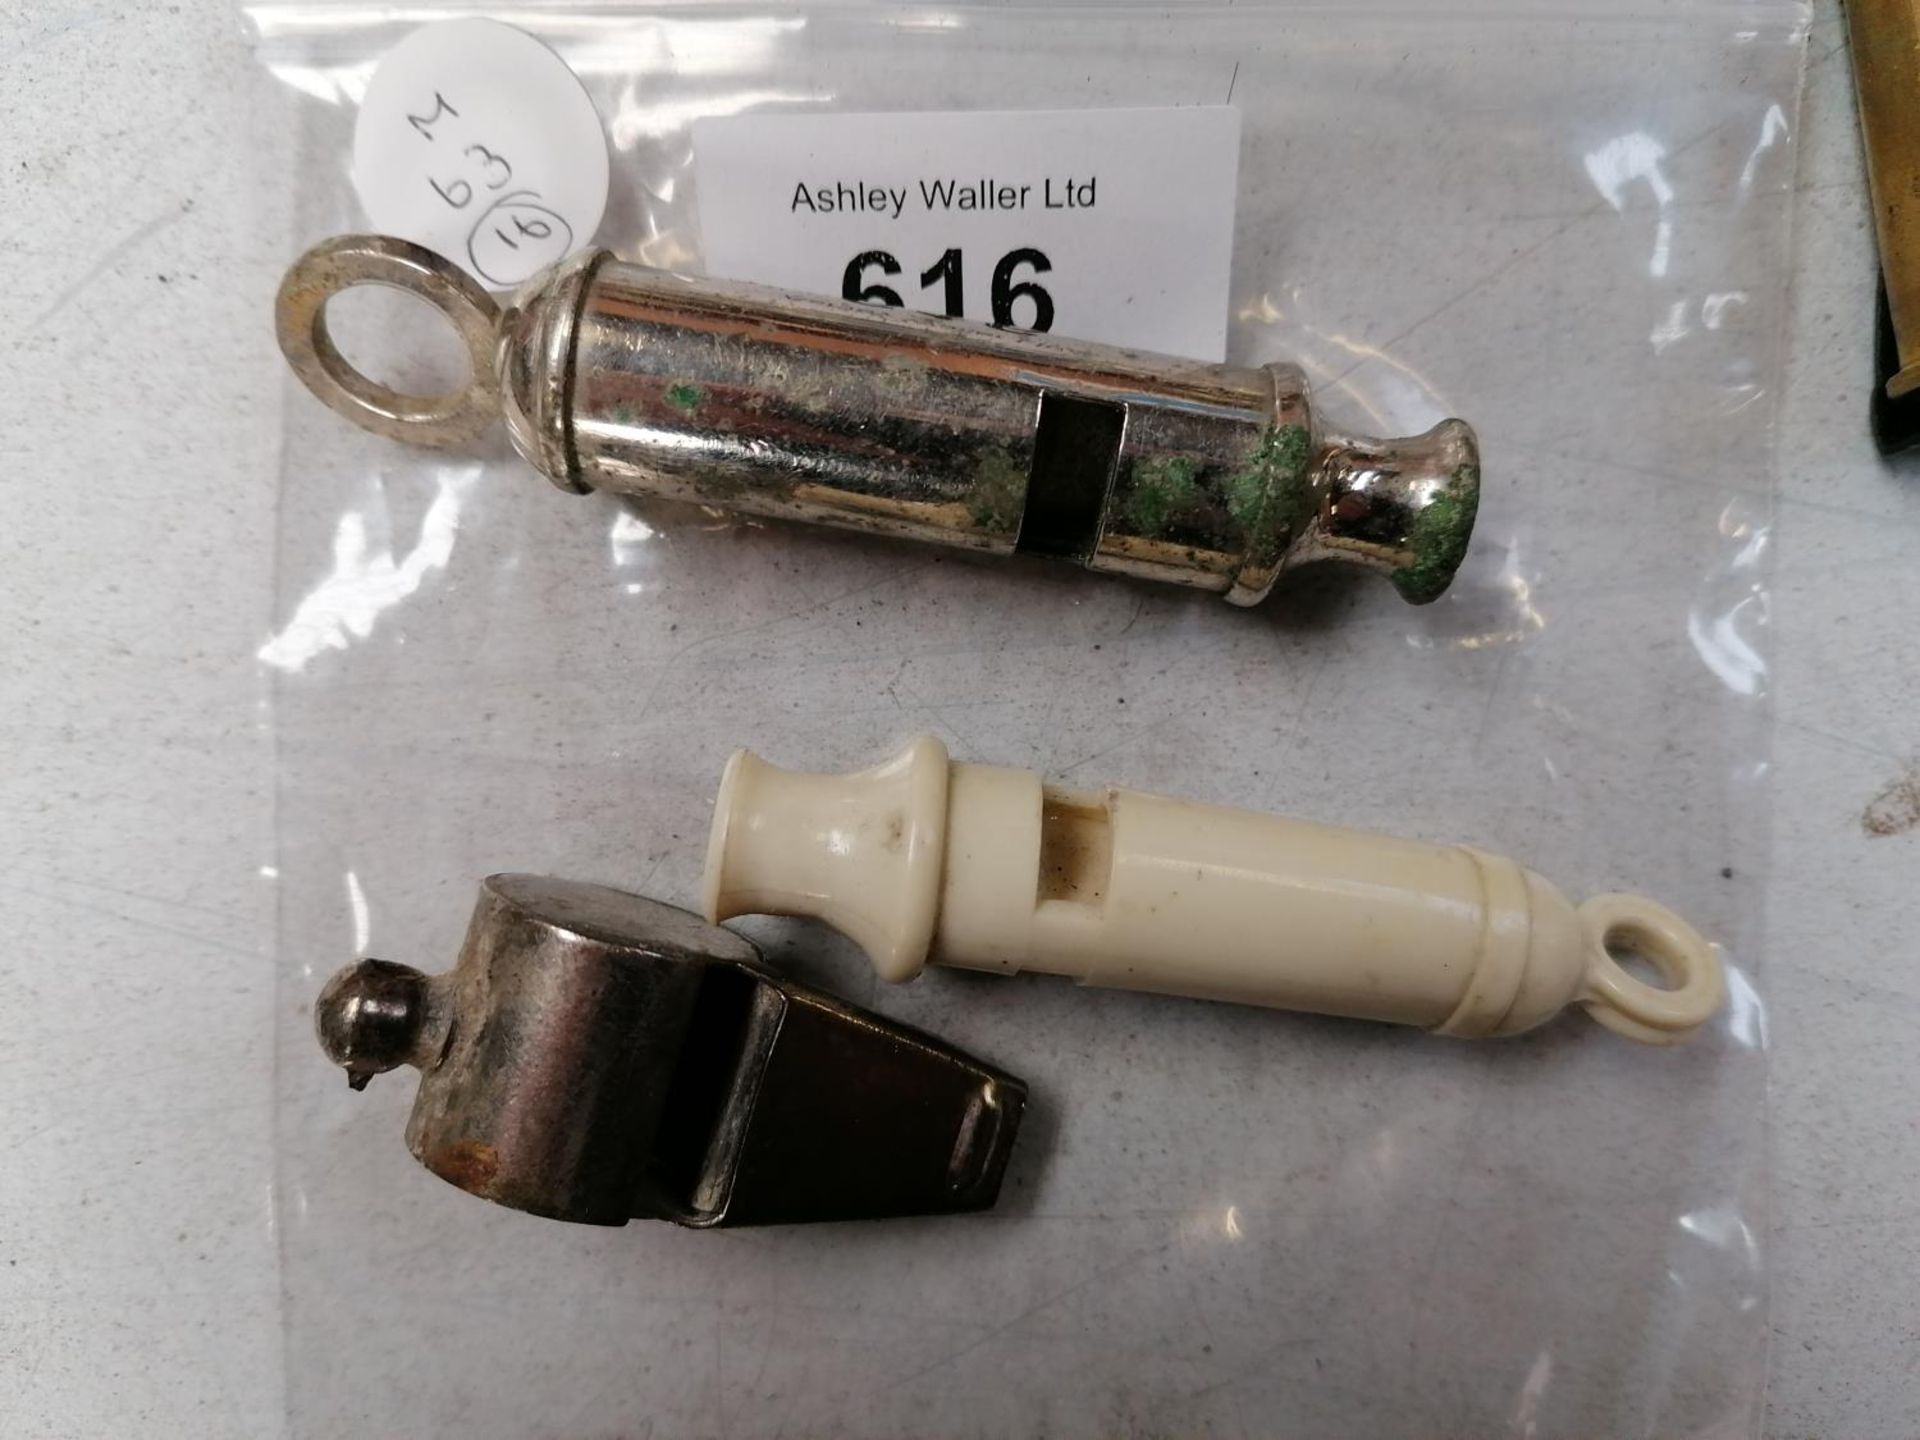 THREE WHISTLES INCLUDING A BRITISH NAVAL WHISTLE ETC